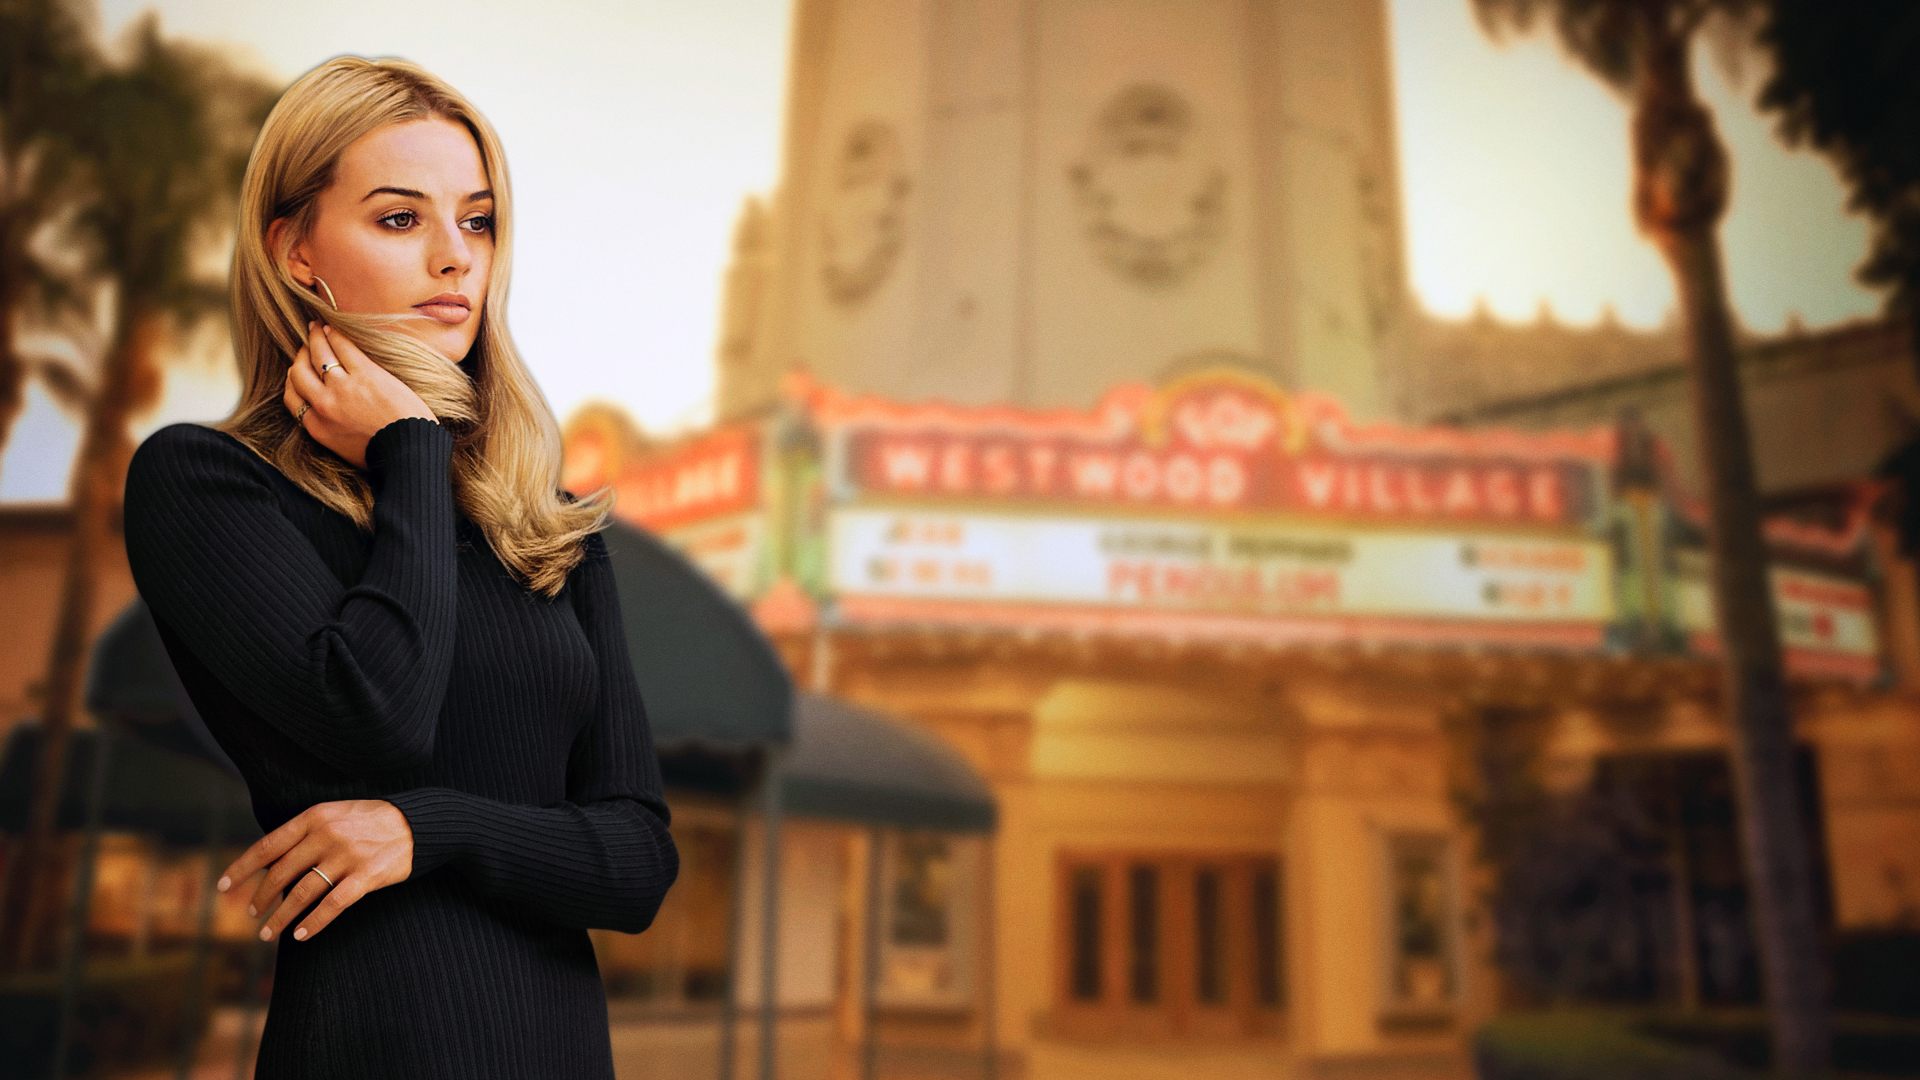 People 1920x1080 women actress blonde long hair Once Upon a Time in Hollywood Margot Robbie movies women outdoors street black dress hoop earrings sweater dress